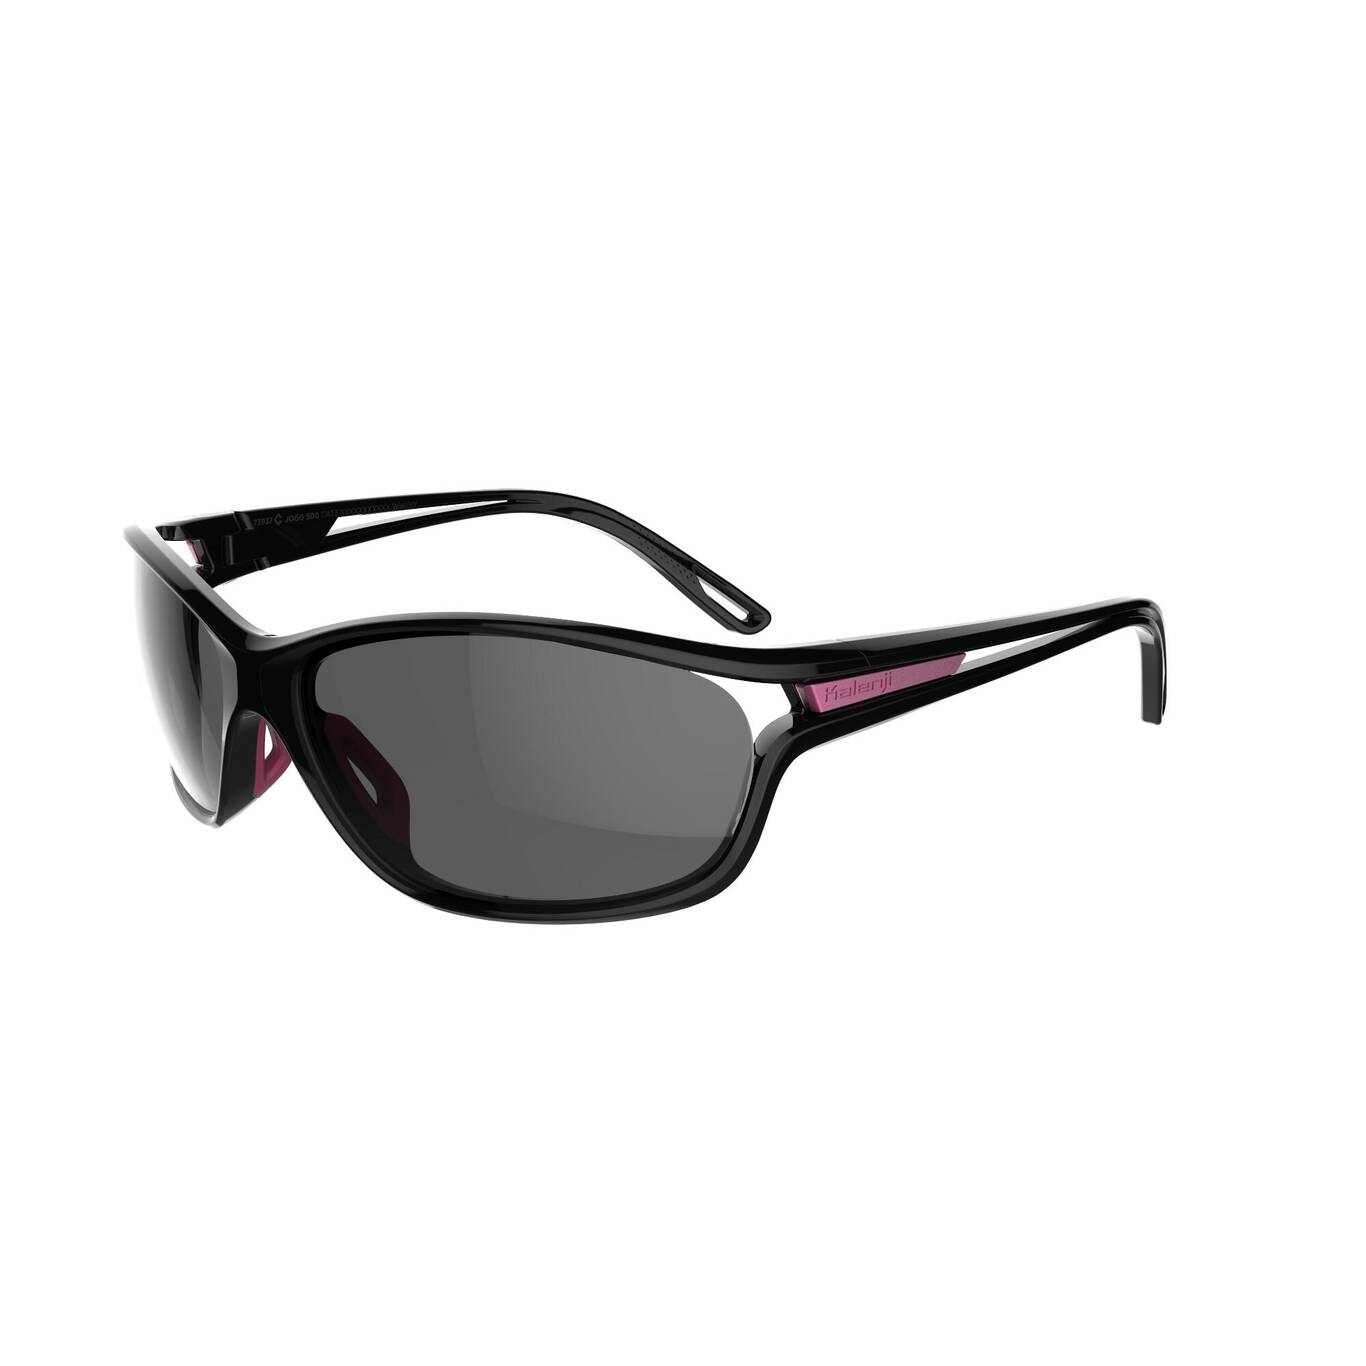 RUNSTYLE ADULT CATEGORY 3 RUNNING GLASSES - GREY/PURPLE